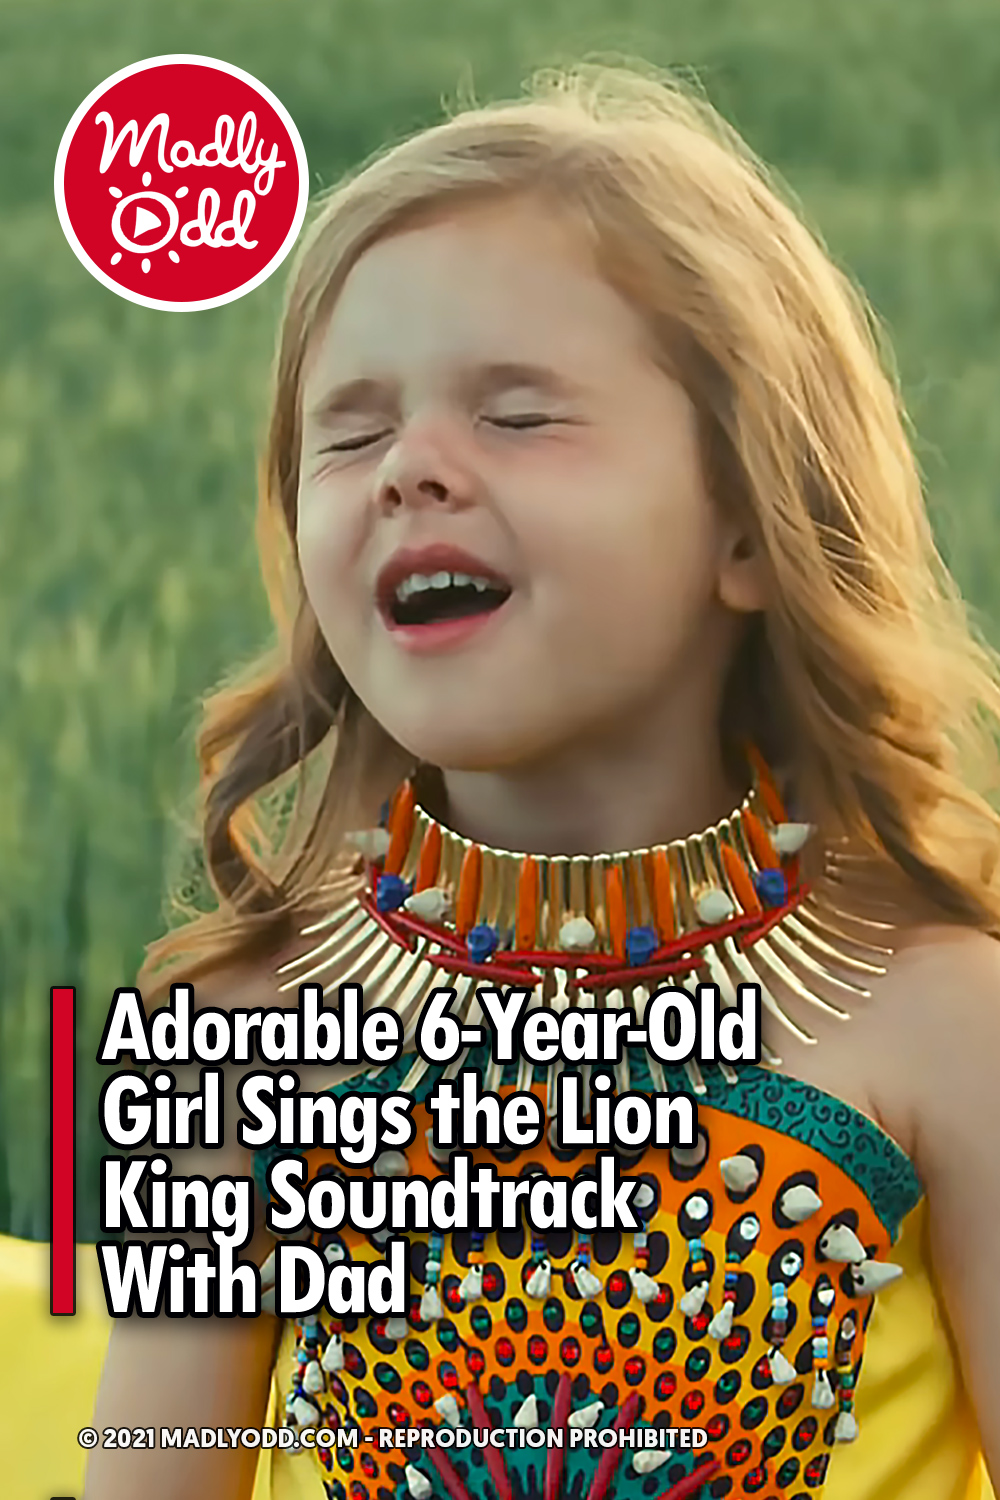 Adorable 6-Year-Old Girl Sings the Lion King Soundtrack With Dad